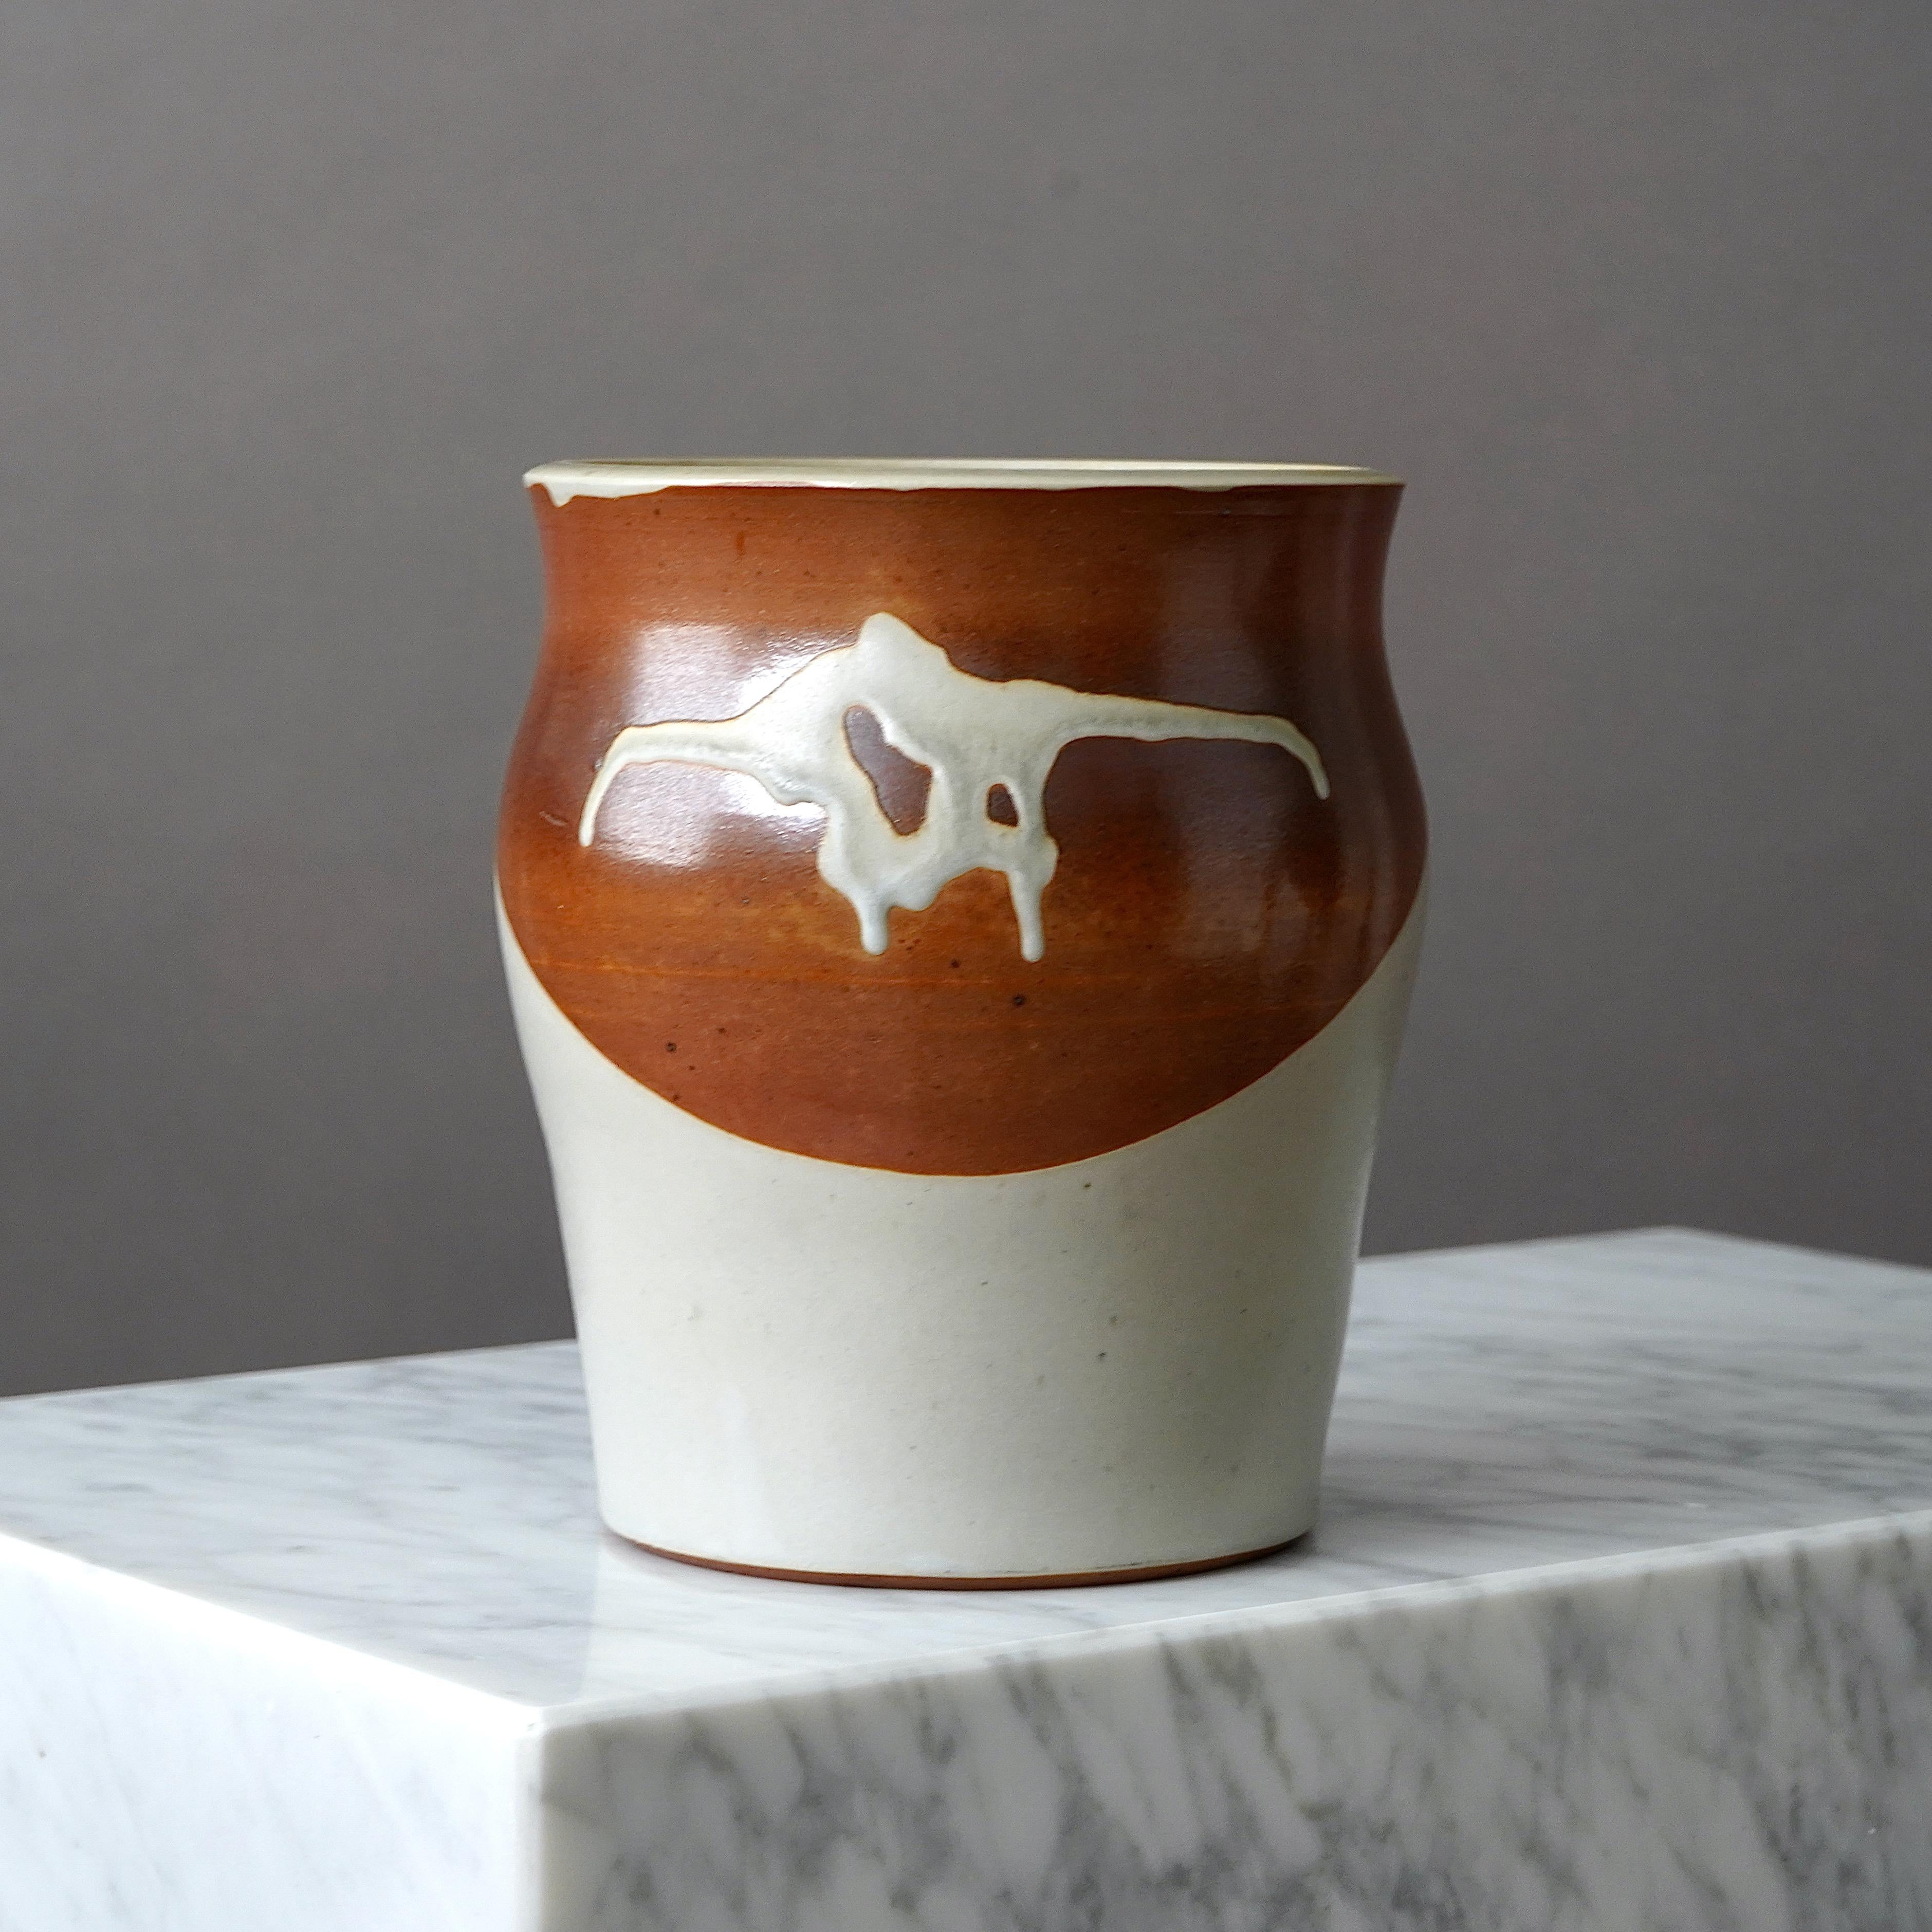 A beautiful and unique stoneware vase with amazing glaze. 
Made by Rolf Palm, in the artist's studio, Mölle, Sweden, 1985.

Great condition. Incised ’Palm / Mölle / H5’.

Rolf Palm (1930–2018) was one of Sweden’s leading ceramic artists in the 20th